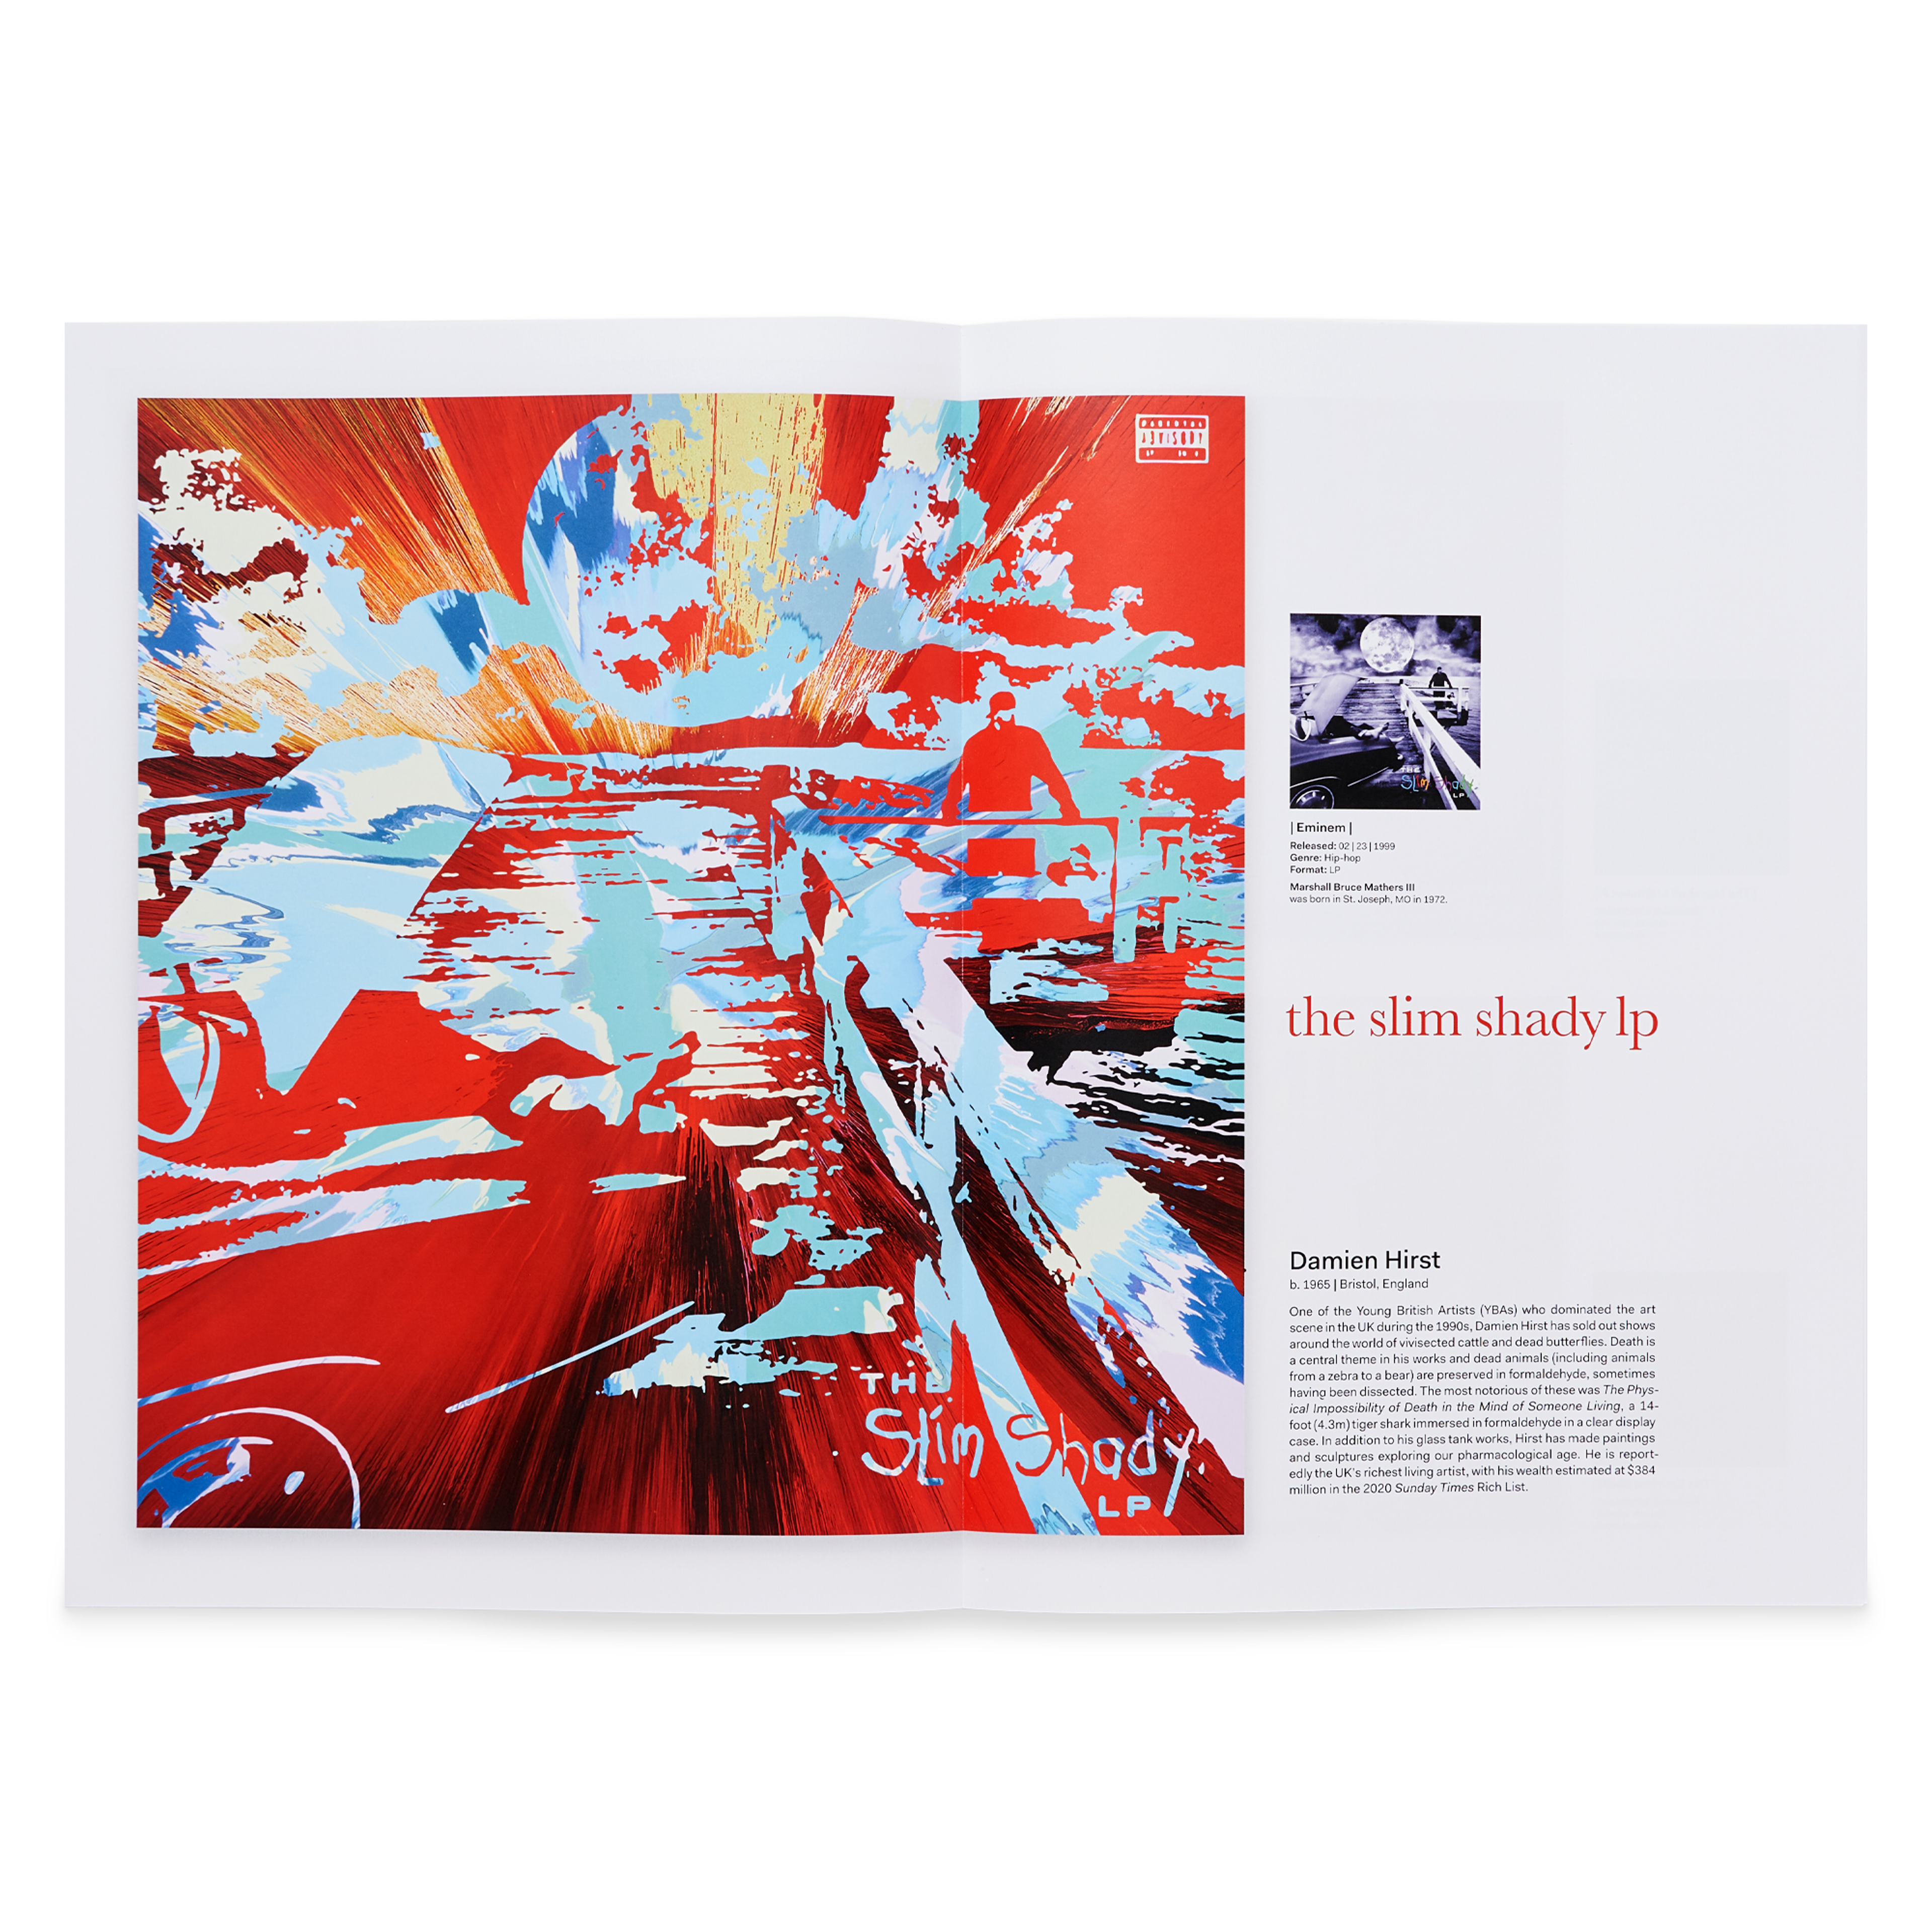 Alternate View 8 of Billie Eilish - dont smile at me by Cecily Brown Gallery Vinyl